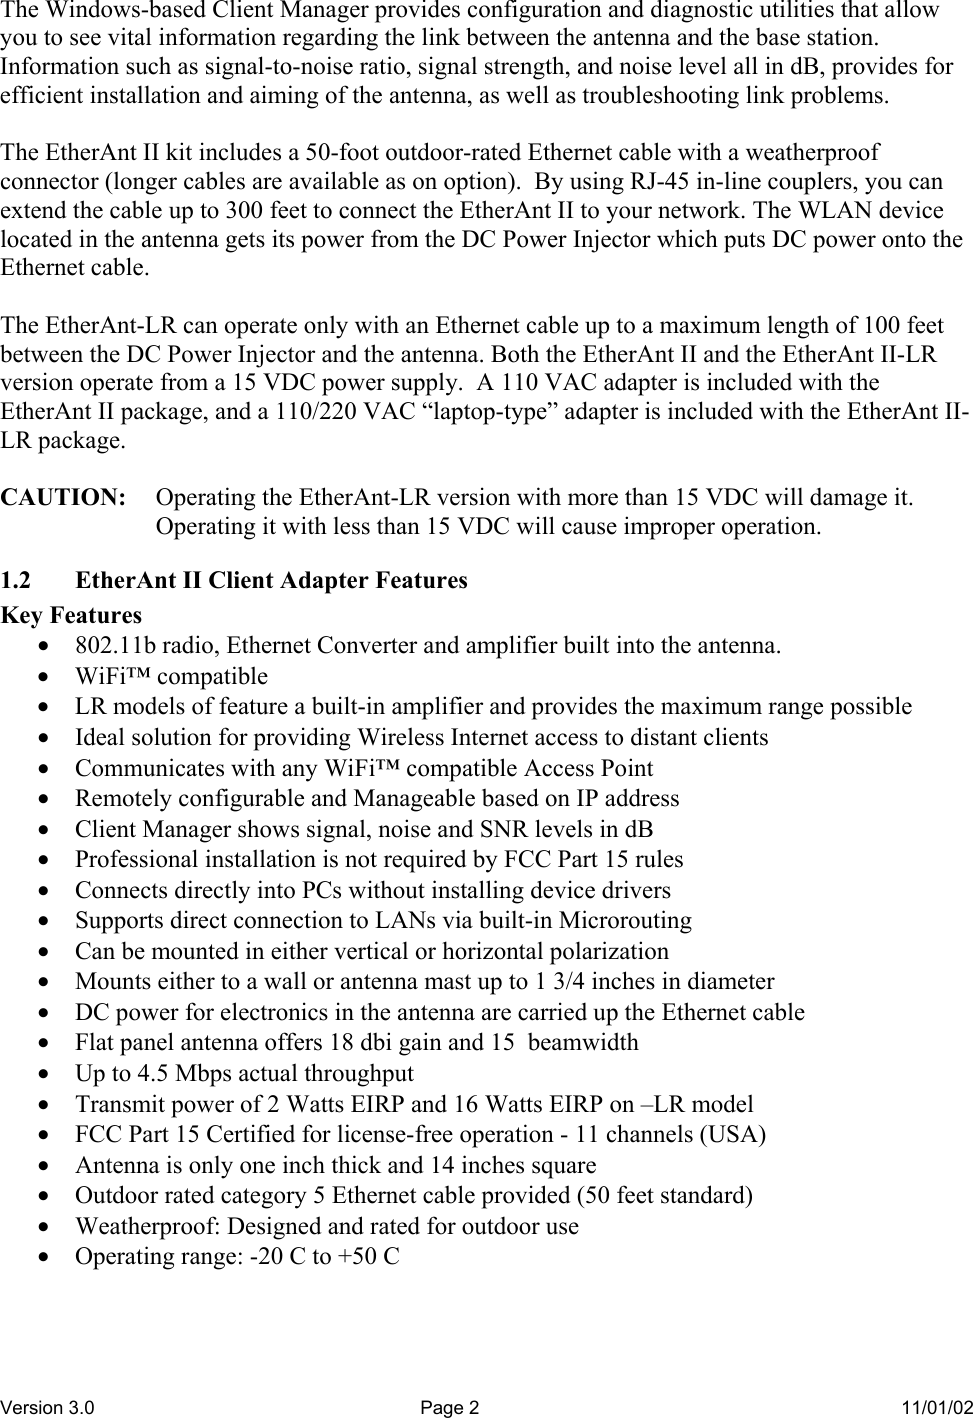 Version 3.0  Page 2  11/01/02 The Windows-based Client Manager provides configuration and diagnostic utilities that allow you to see vital information regarding the link between the antenna and the base station.  Information such as signal-to-noise ratio, signal strength, and noise level all in dB, provides for efficient installation and aiming of the antenna, as well as troubleshooting link problems.  The EtherAnt II kit includes a 50-foot outdoor-rated Ethernet cable with a weatherproof connector (longer cables are available as on option).  By using RJ-45 in-line couplers, you can extend the cable up to 300 feet to connect the EtherAnt II to your network. The WLAN device located in the antenna gets its power from the DC Power Injector which puts DC power onto the Ethernet cable.  The EtherAnt-LR can operate only with an Ethernet cable up to a maximum length of 100 feet between the DC Power Injector and the antenna. Both the EtherAnt II and the EtherAnt II-LR version operate from a 15 VDC power supply.  A 110 VAC adapter is included with the EtherAnt II package, and a 110/220 VAC “laptop-type” adapter is included with the EtherAnt II-LR package.  CAUTION:  Operating the EtherAnt-LR version with more than 15 VDC will damage it. Operating it with less than 15 VDC will cause improper operation. 1.2  EtherAnt II Client Adapter Features Key Features •  802.11b radio, Ethernet Converter and amplifier built into the antenna. •  WiFi™ compatible •  LR models of feature a built-in amplifier and provides the maximum range possible •  Ideal solution for providing Wireless Internet access to distant clients •  Communicates with any WiFi™ compatible Access Point •  Remotely configurable and Manageable based on IP address •  Client Manager shows signal, noise and SNR levels in dB •  Professional installation is not required by FCC Part 15 rules •  Connects directly into PCs without installing device drivers •  Supports direct connection to LANs via built-in Microrouting •  Can be mounted in either vertical or horizontal polarization •  Mounts either to a wall or antenna mast up to 1 3/4 inches in diameter •  DC power for electronics in the antenna are carried up the Ethernet cable •  Flat panel antenna offers 18 dbi gain and 15  beamwidth •  Up to 4.5 Mbps actual throughput •  Transmit power of 2 Watts EIRP and 16 Watts EIRP on –LR model •  FCC Part 15 Certified for license-free operation - 11 channels (USA) •  Antenna is only one inch thick and 14 inches square •  Outdoor rated category 5 Ethernet cable provided (50 feet standard) •  Weatherproof: Designed and rated for outdoor use •  Operating range: -20 C to +50 C 